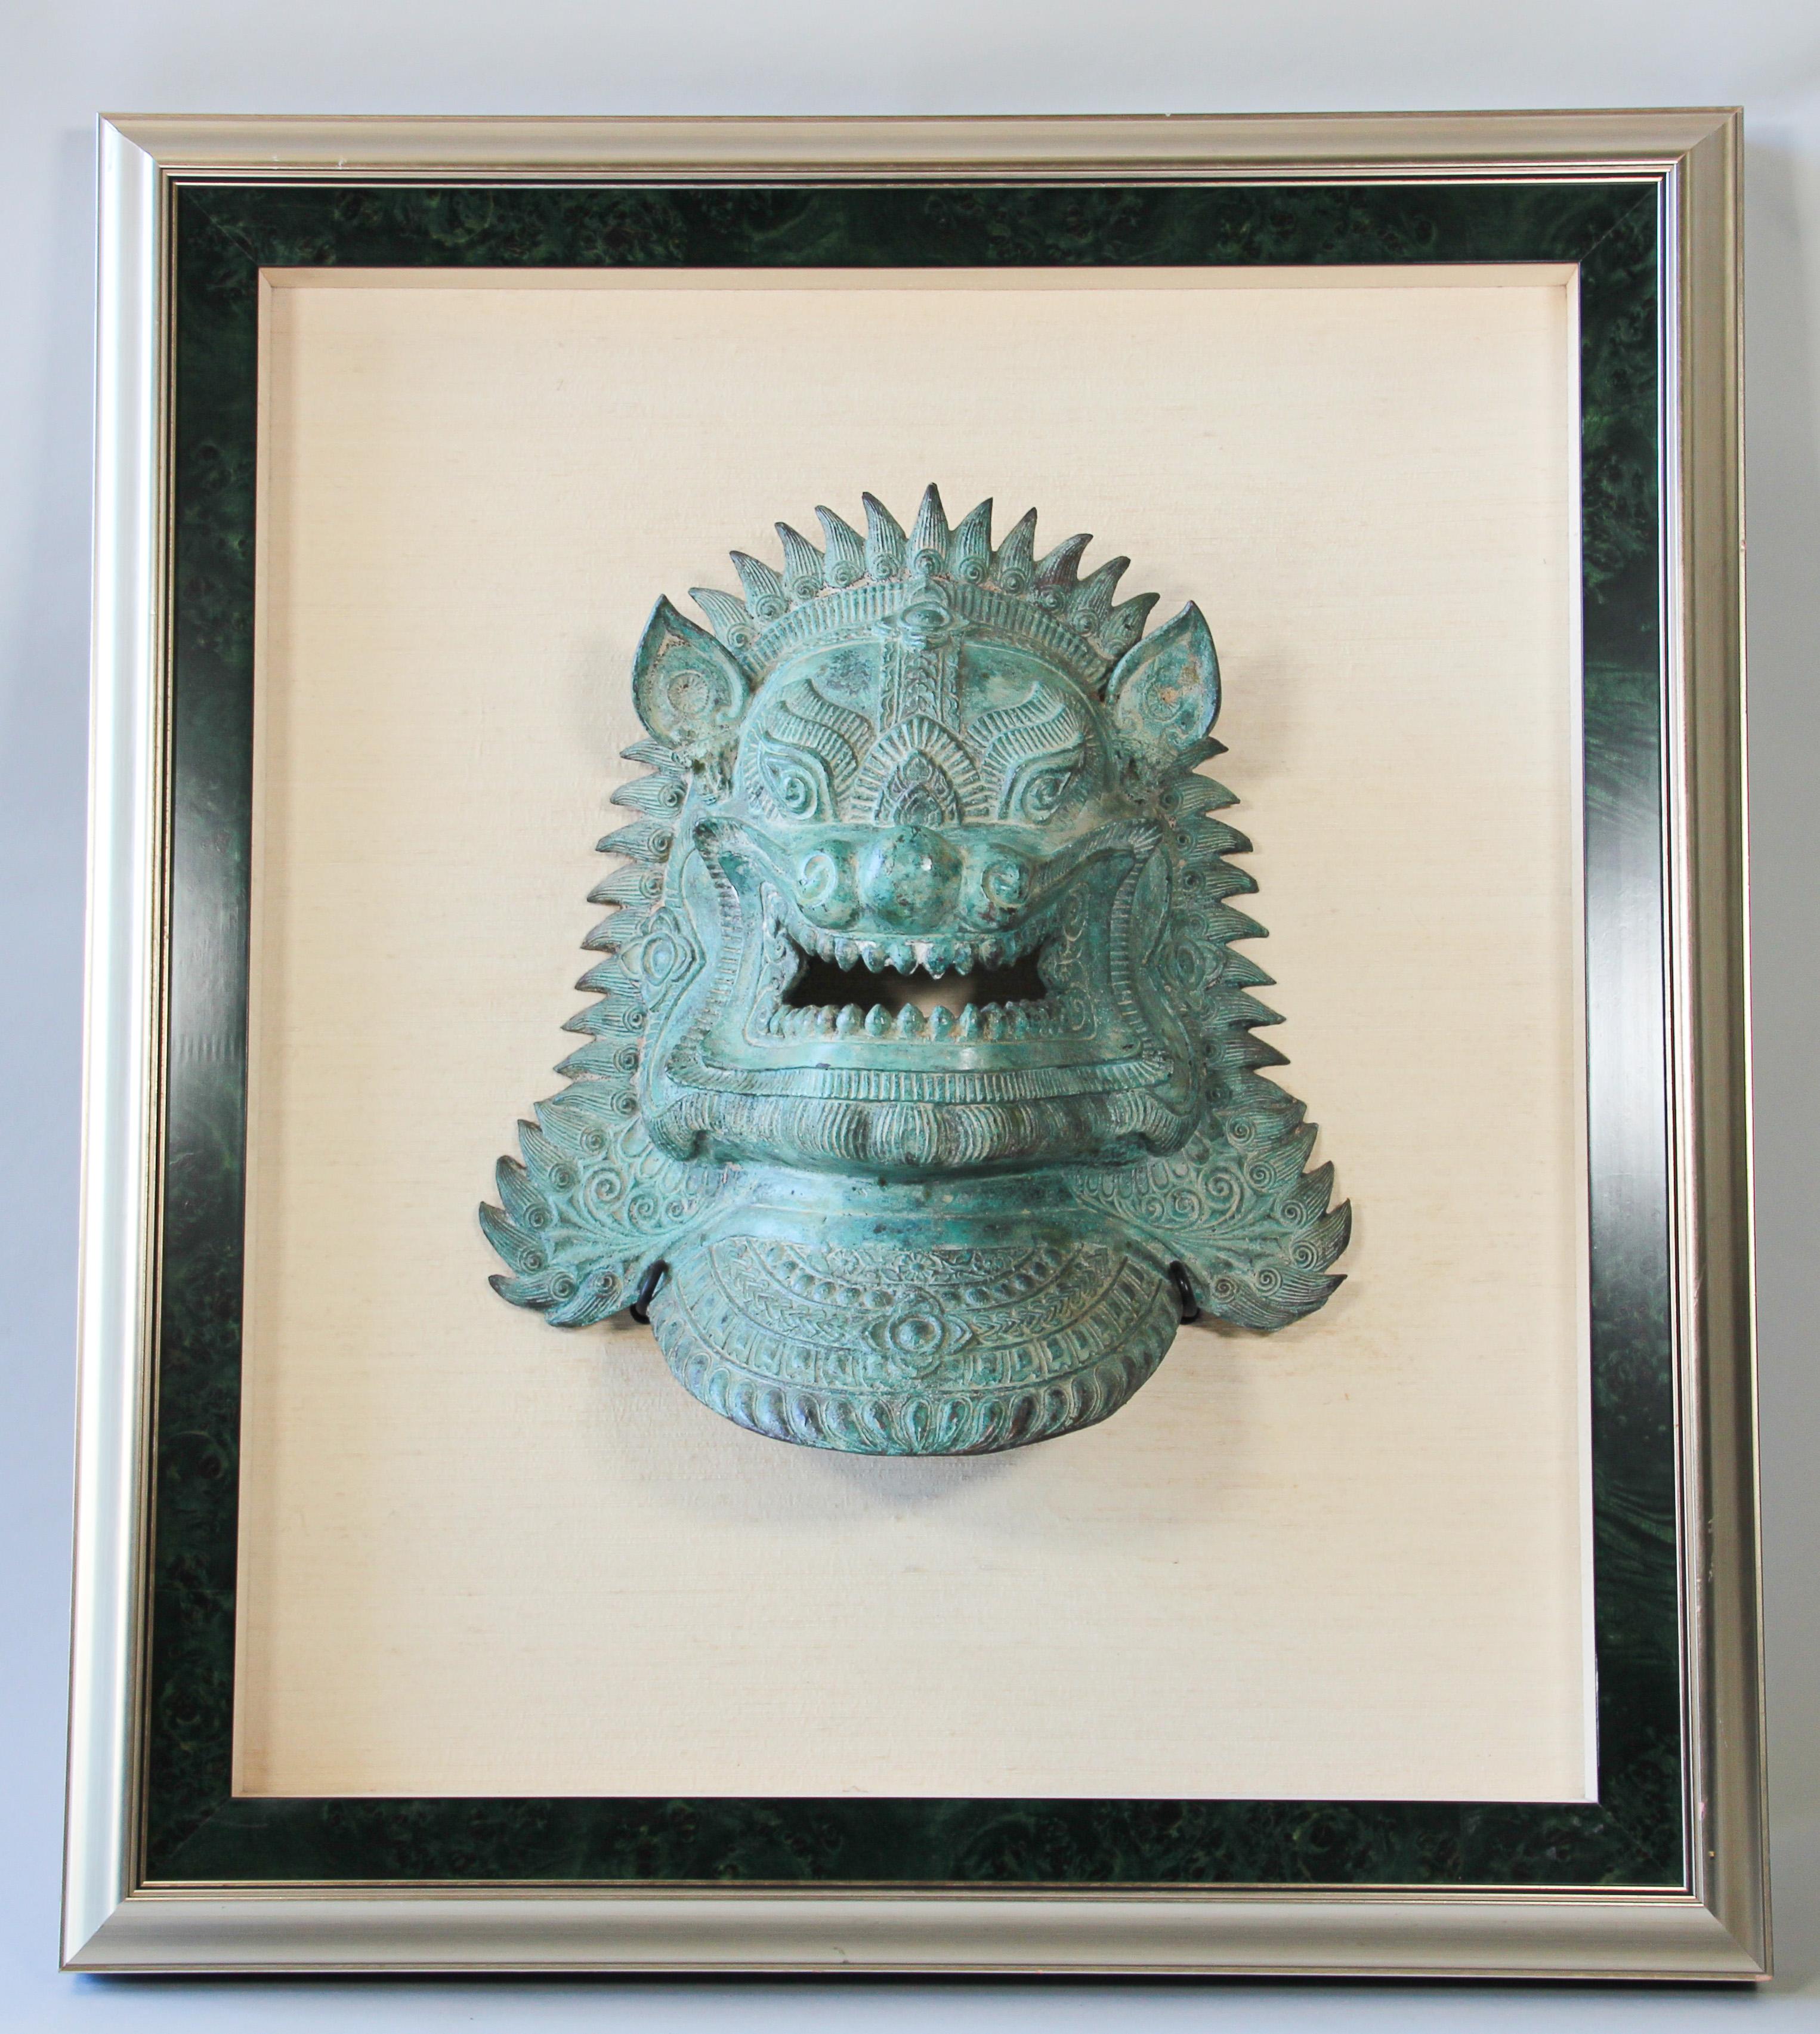 Two large Khmer style foo dogs dragon masks mounted and framed.
Featuring a pair of highly detailed stylized metal bronze lions mask sculptures, one male and one female which were thought to protect the home from harmful spiritual influences and